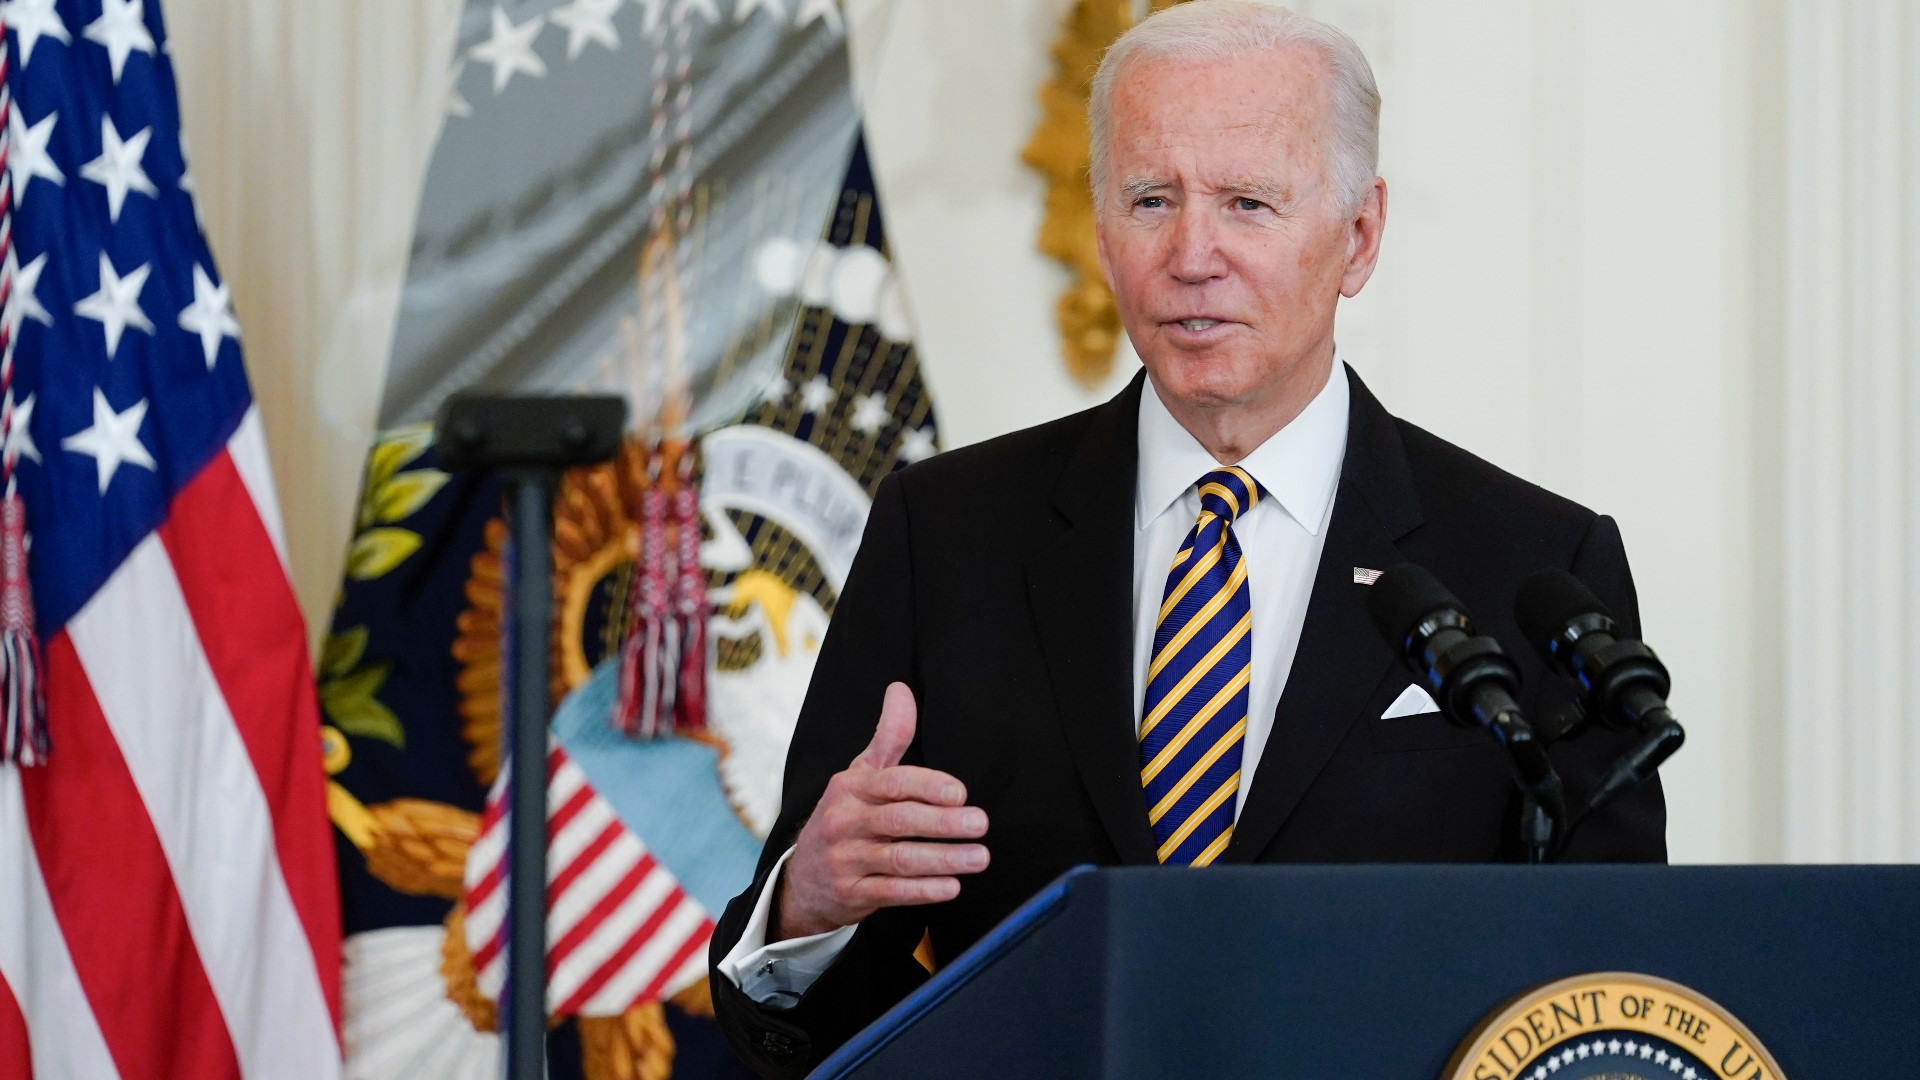 Biden said that the package would also help offset high global food prices, which he said is partly due to Ukraine's wheat exports dropping from Russia's war.